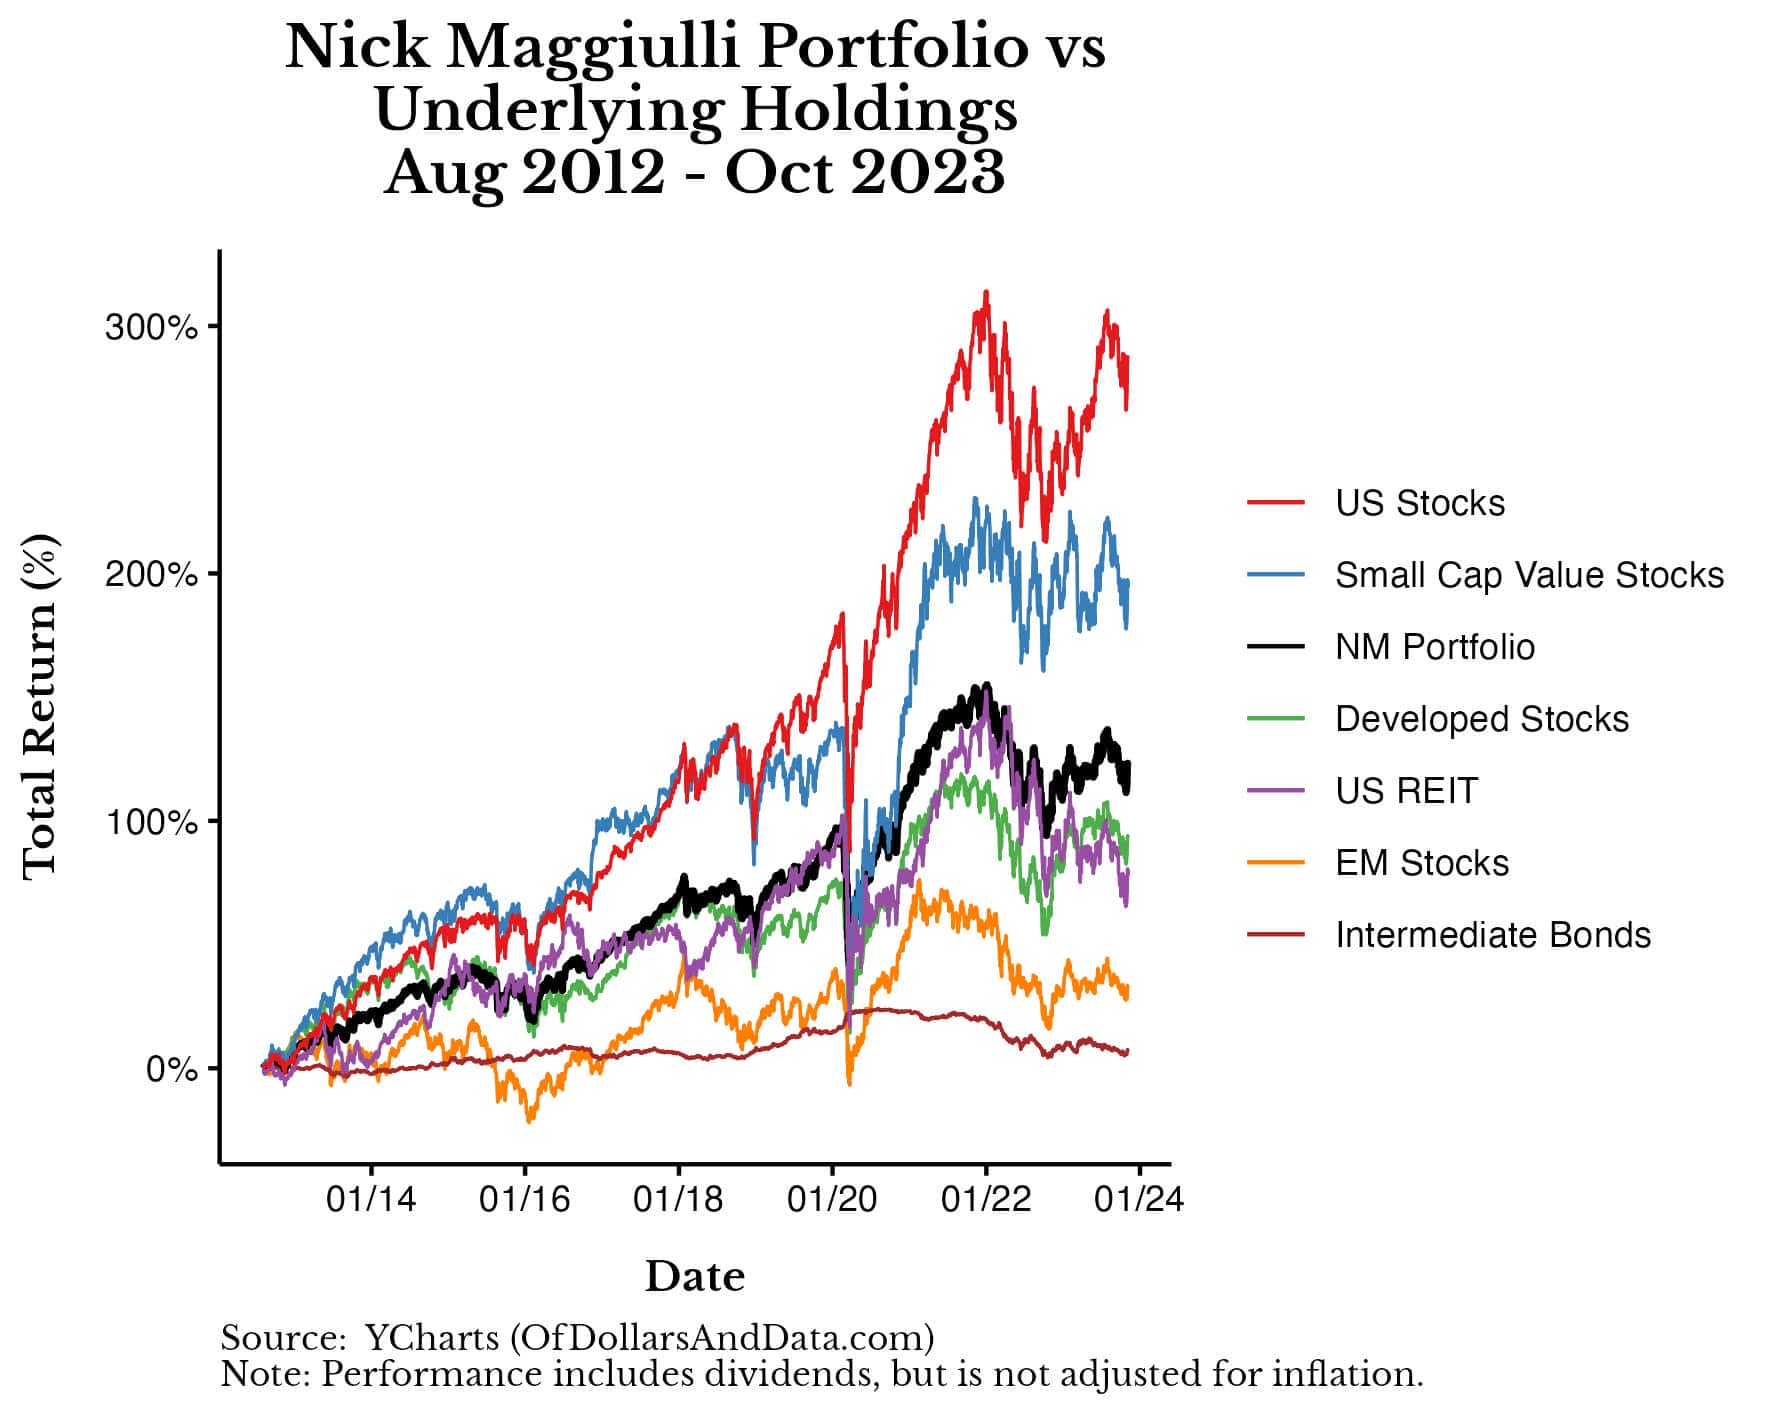 Chart showing the Nick Maggiulli portfolio vs its underlying holdings from Aug 2012 to Oct 2023.